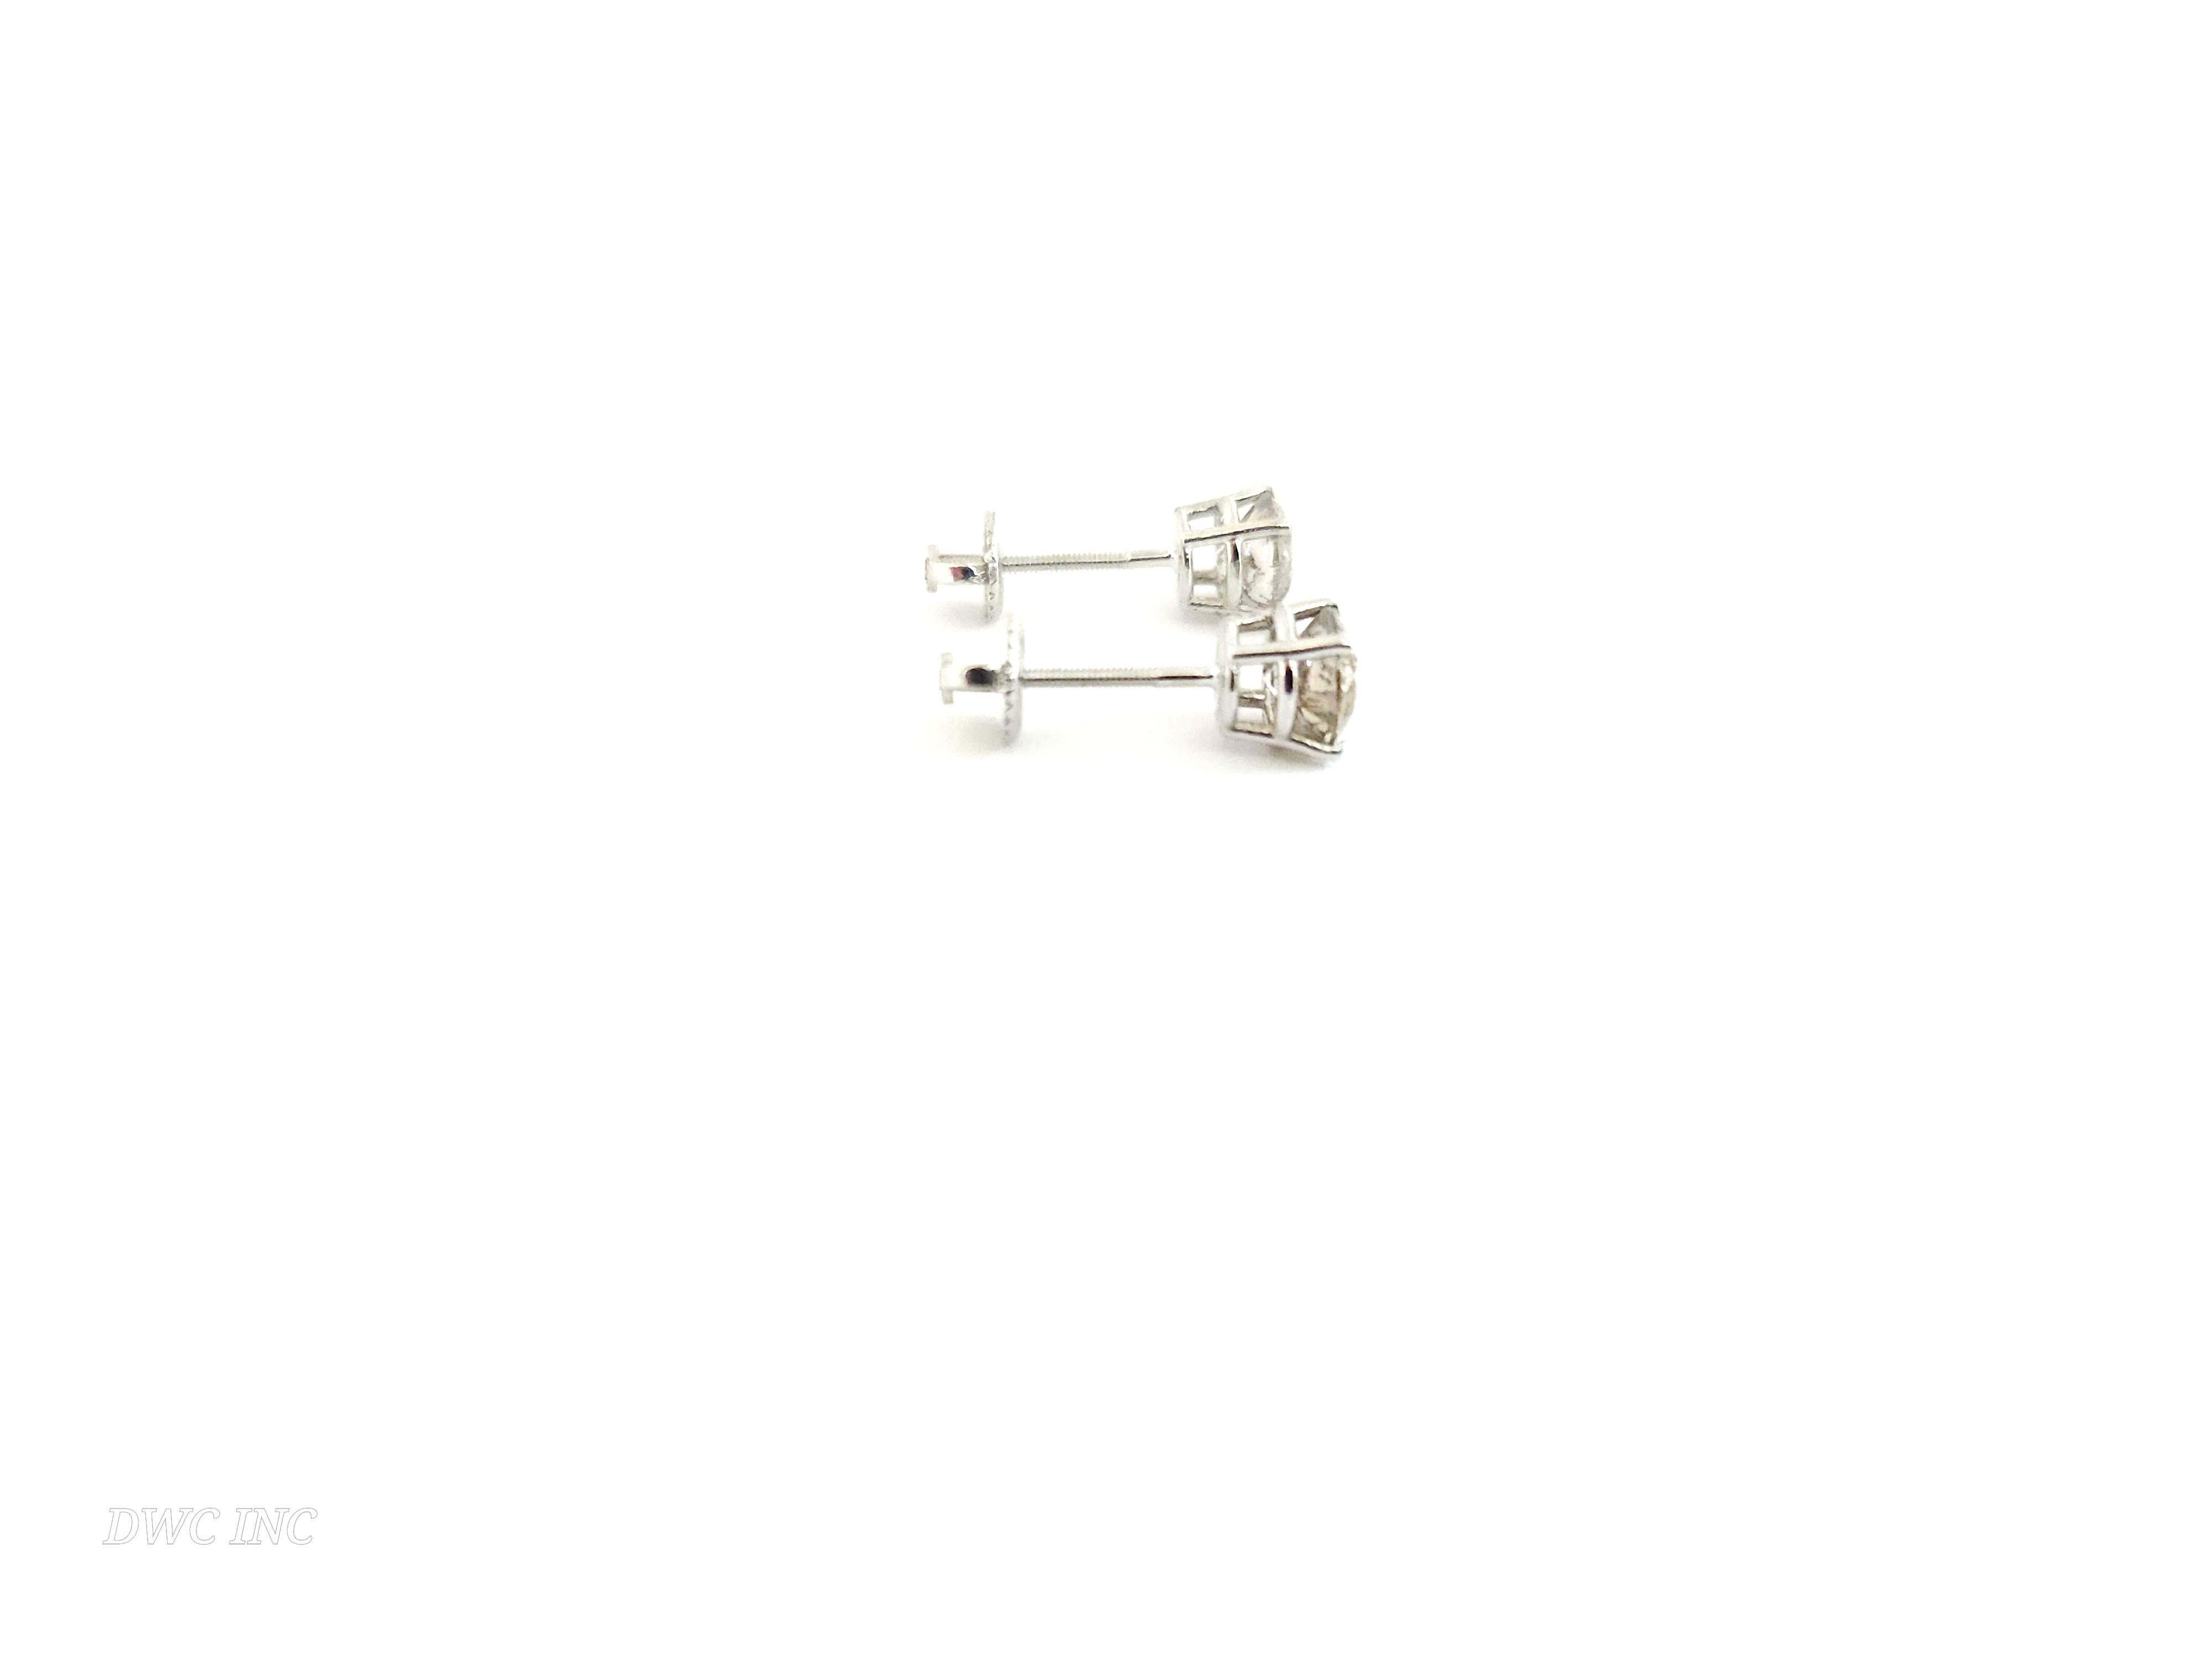 1.69 Ctw Natural Diamond Round Studs White Gold, average color I-J clarity I2,square back.

*Free shipping within U.S*